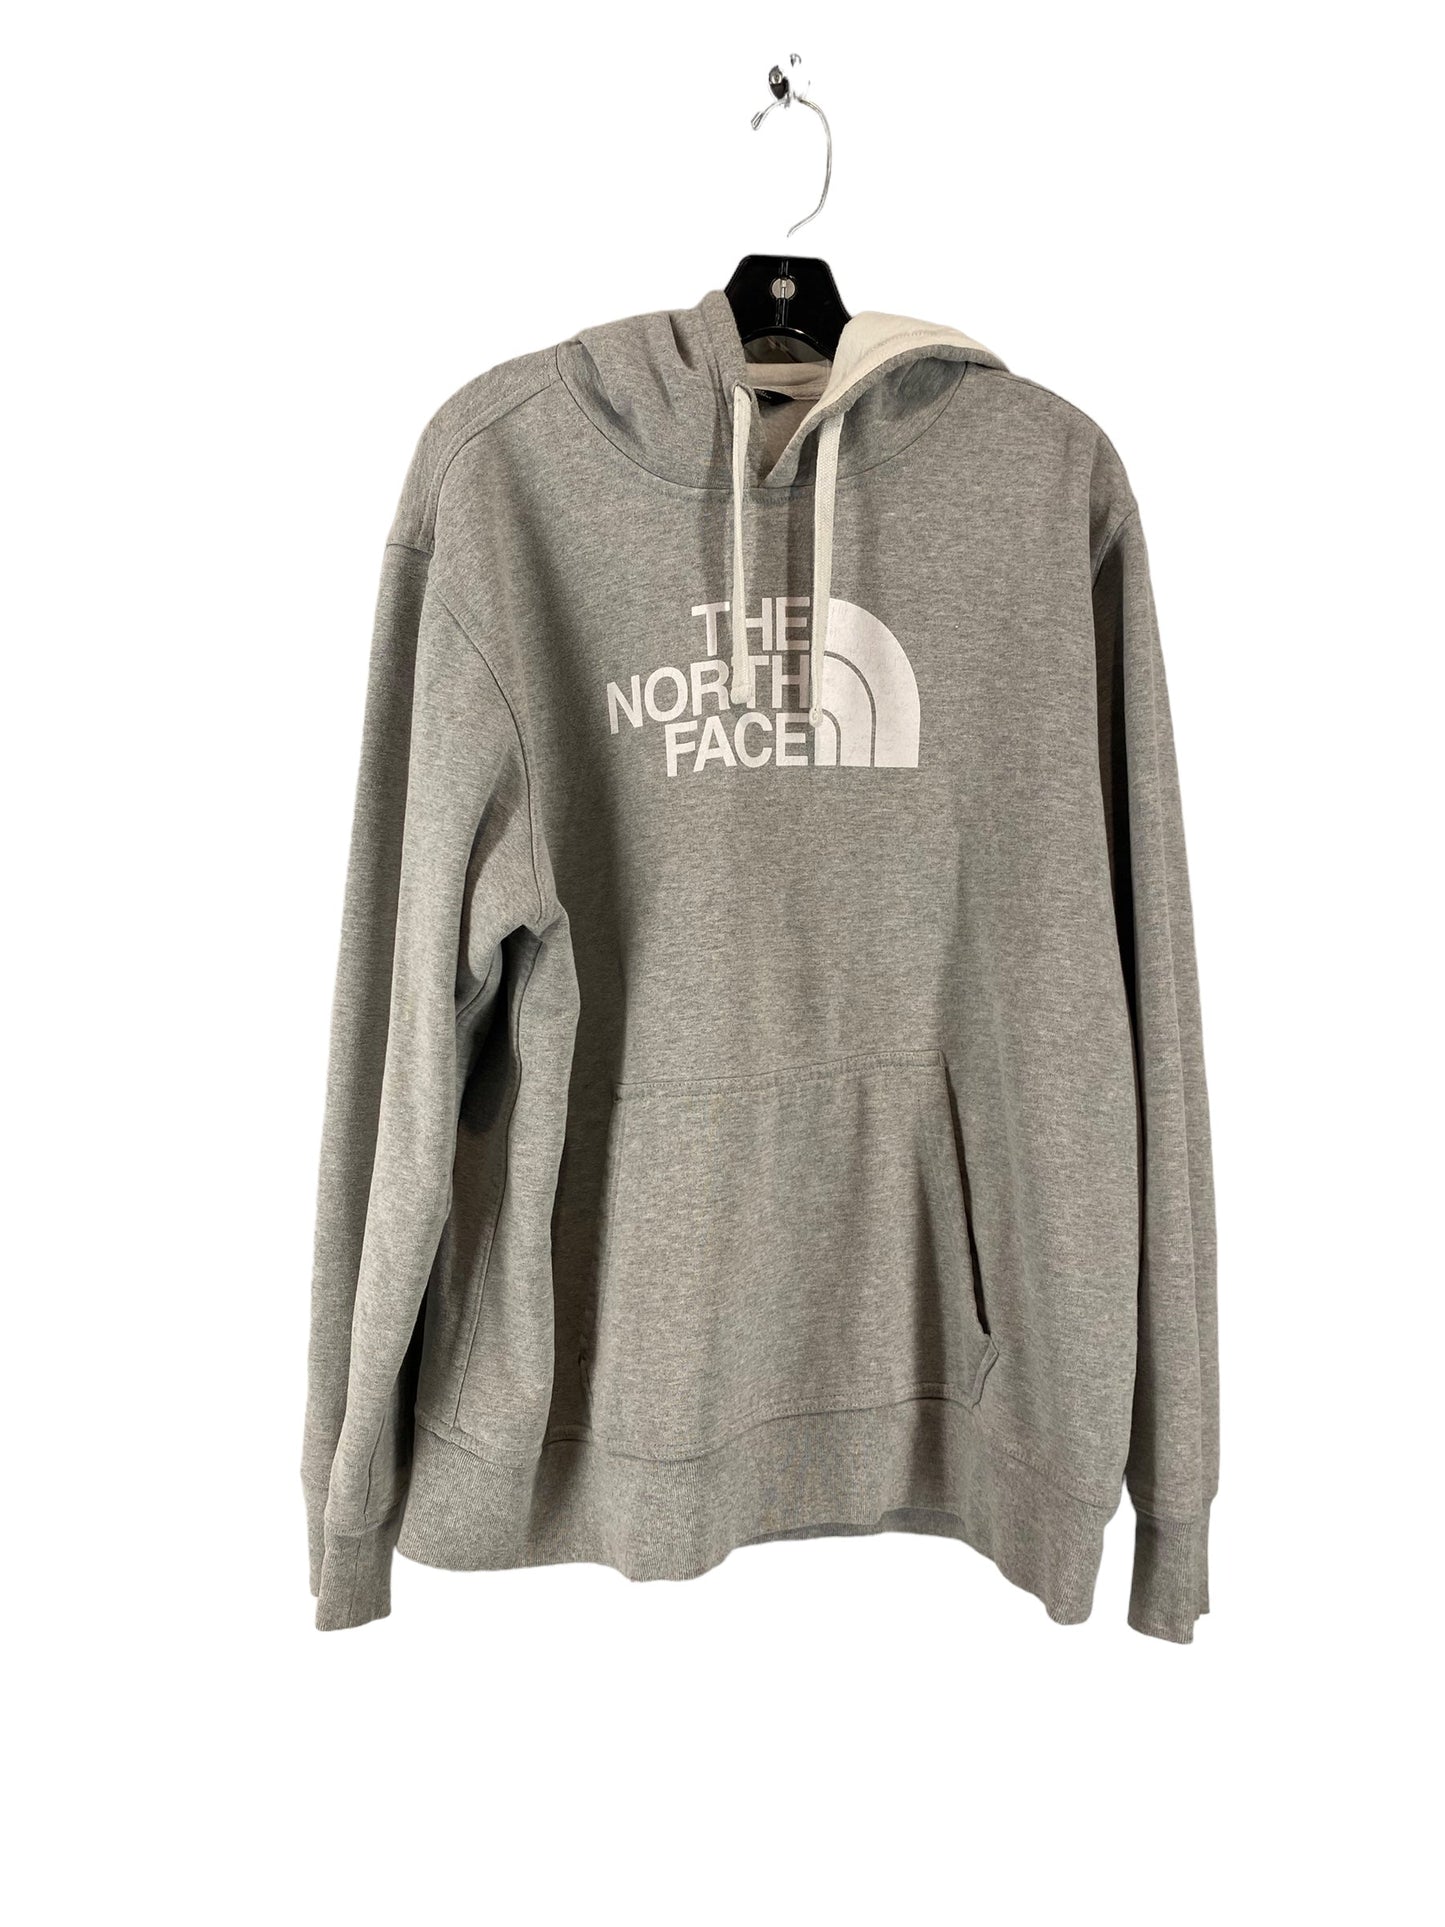 Grey Athletic Top Long Sleeve Hoodie The North Face, Size Xl